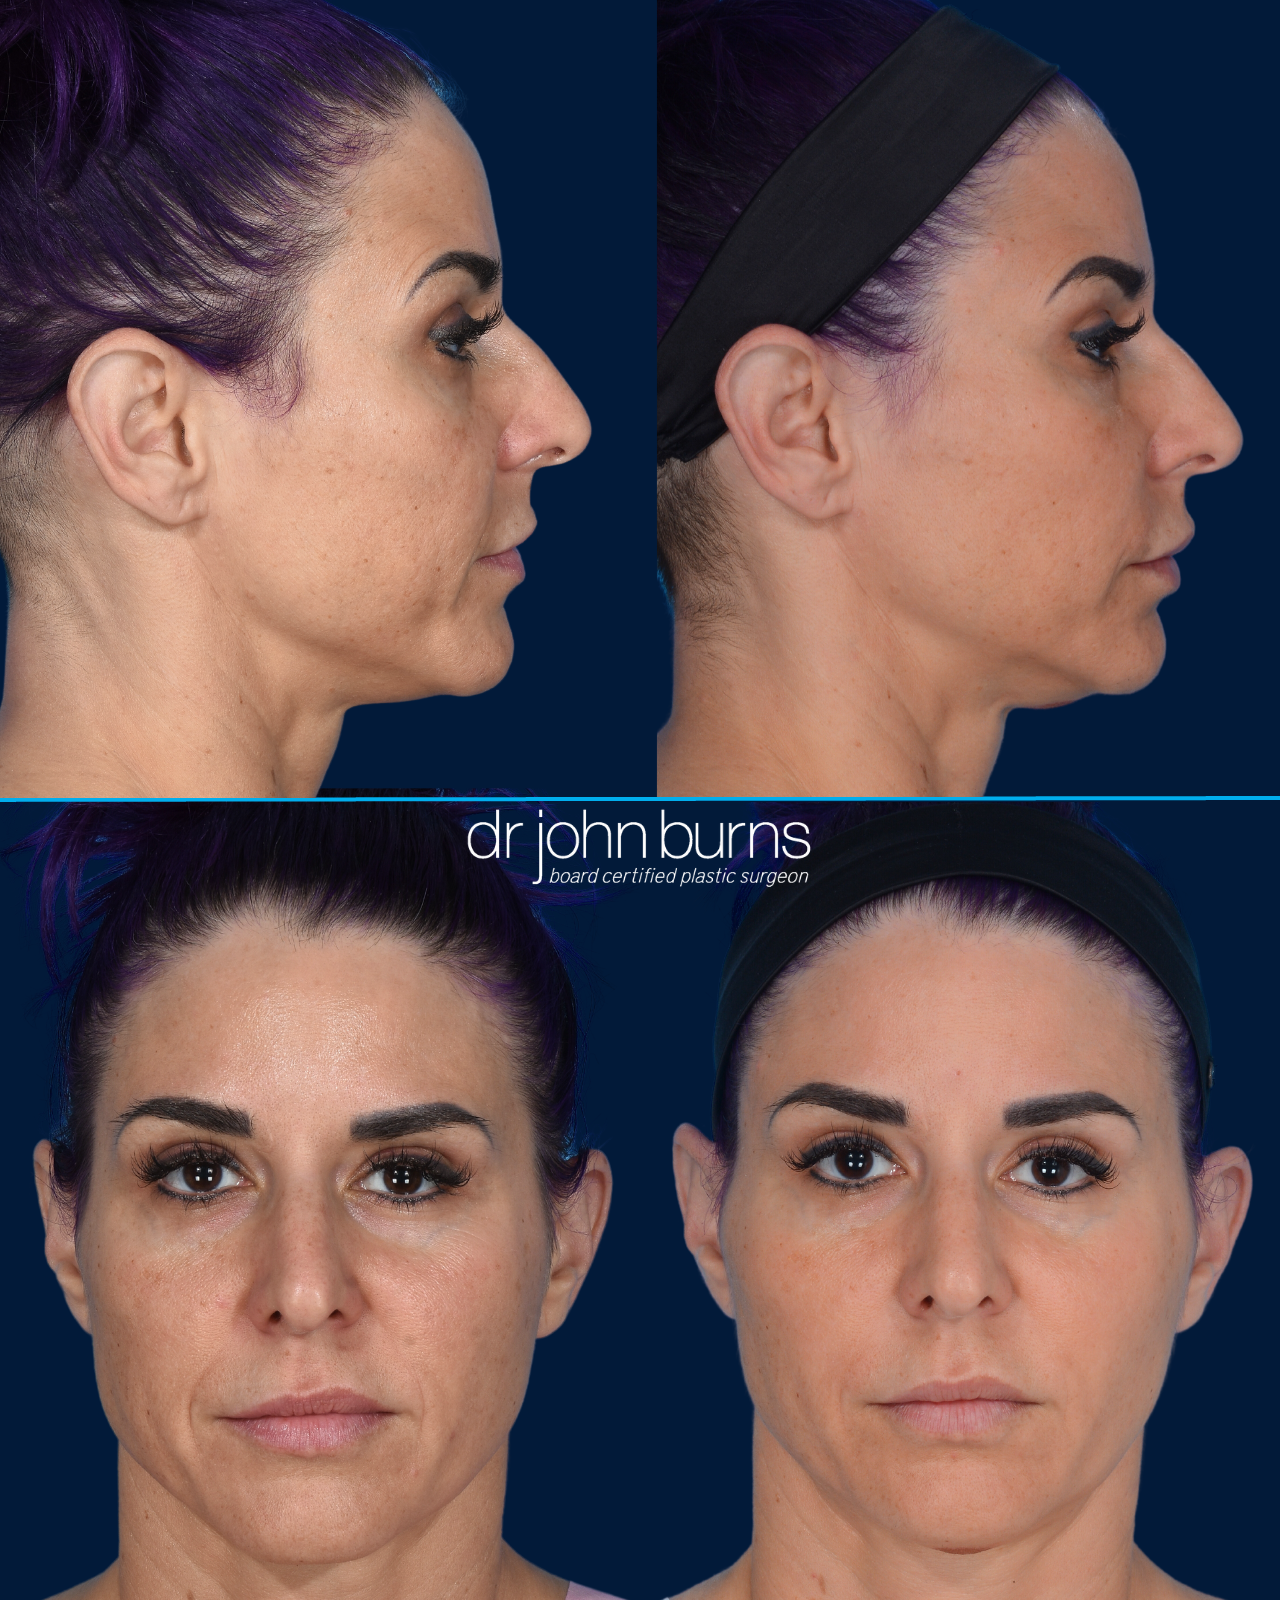 Before and After Fat Grafting to Face | Dallas Fat Transfer | Dr. John Burns